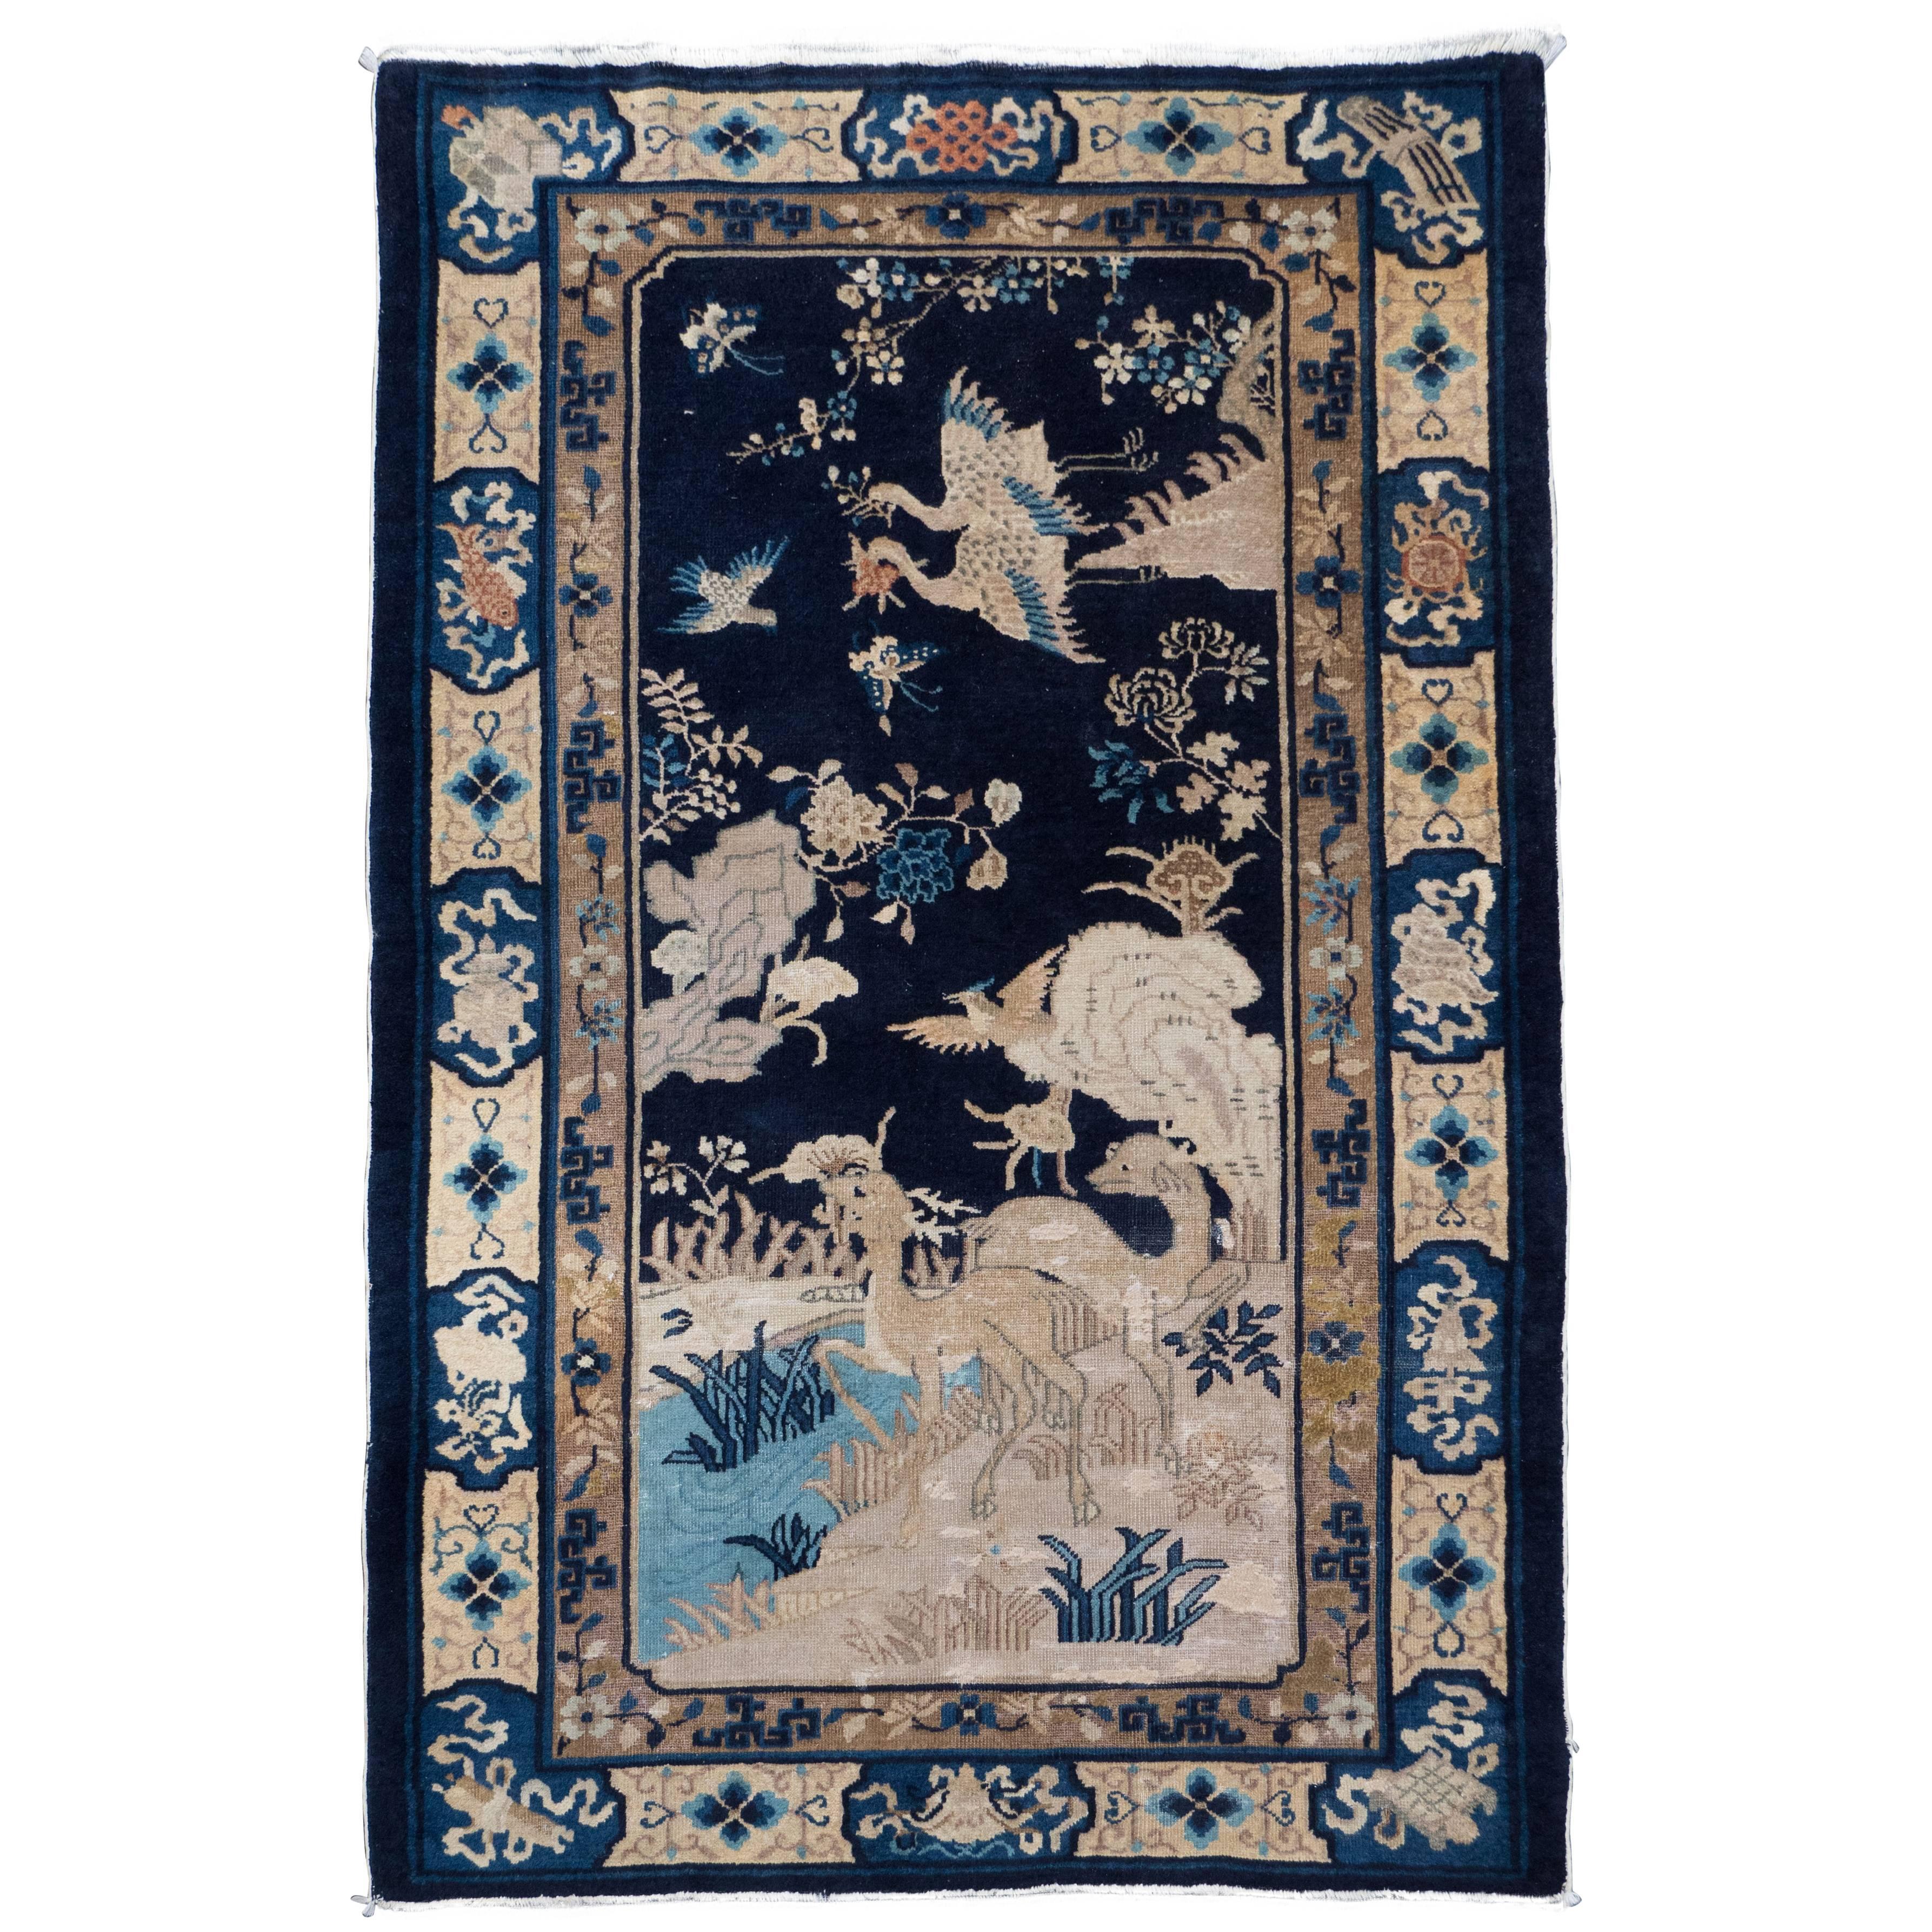 Chinese Art Deco Rug with Hues of Midnight and Royal Blue, Sand and Rose